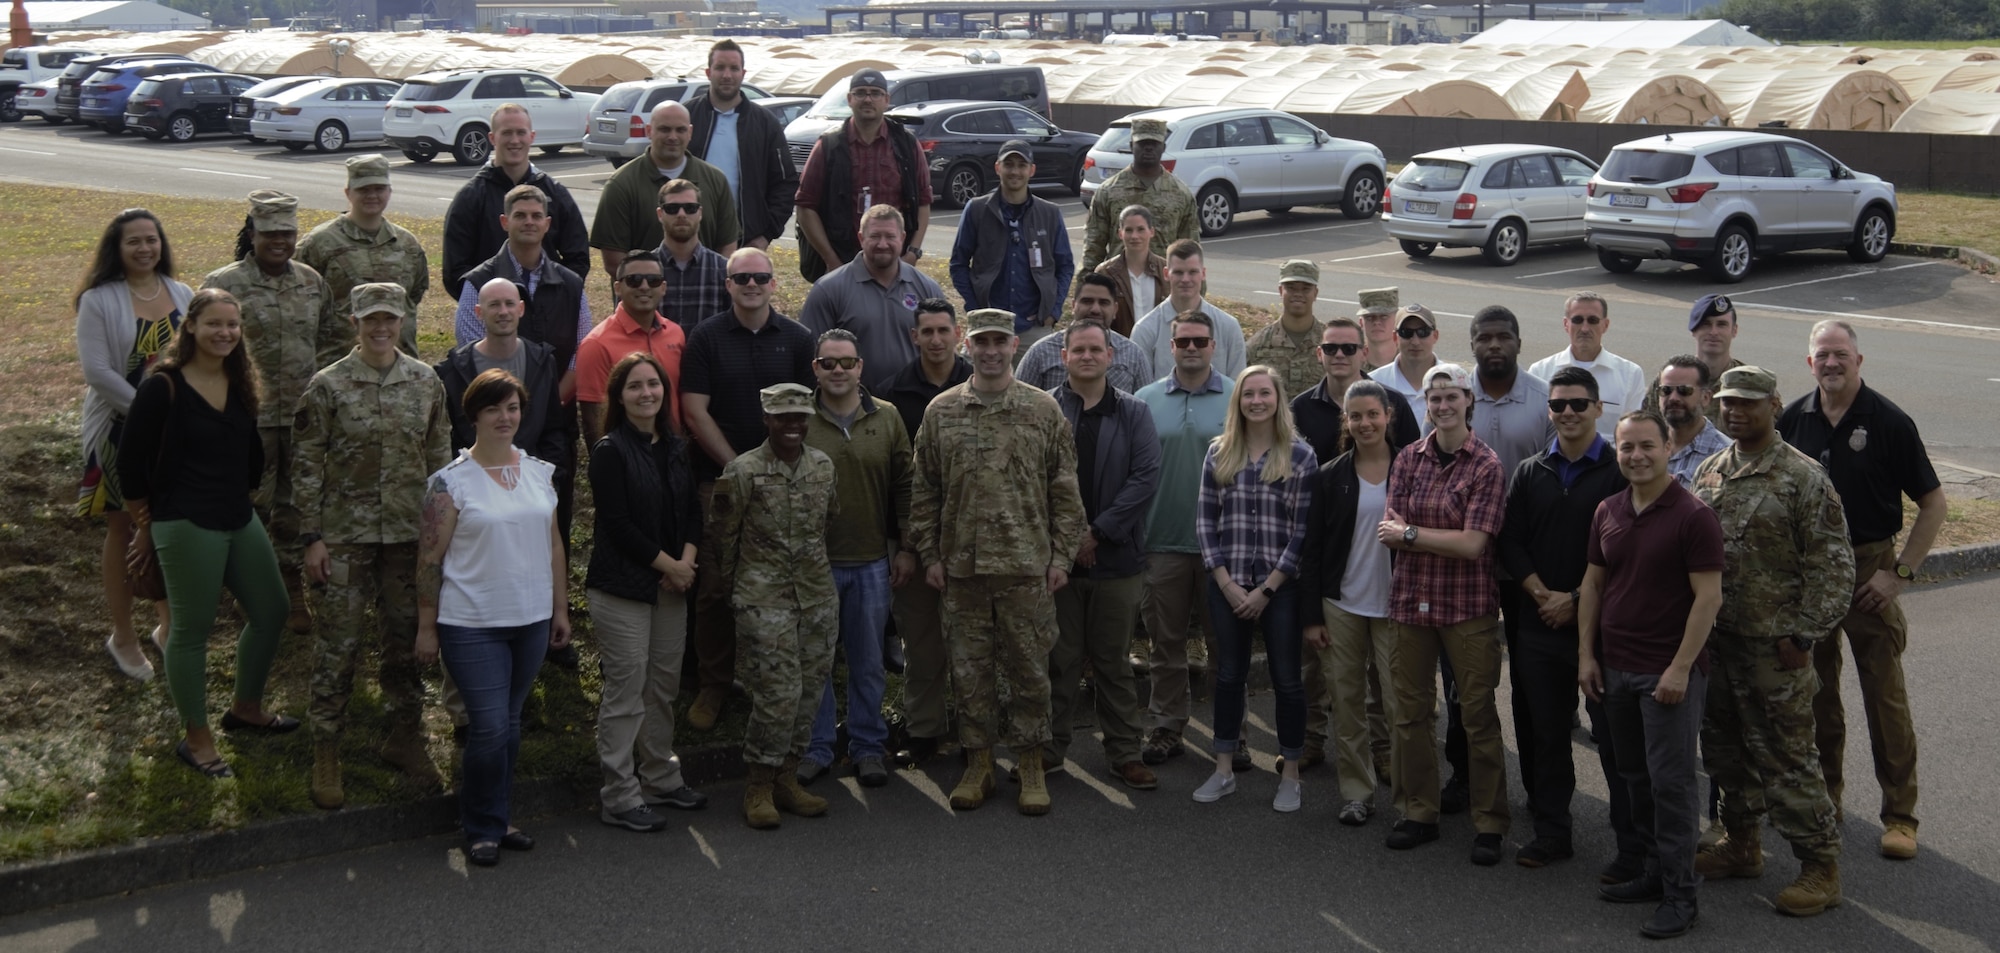 Col. Terrence M. Joyce, Office of Special Investigations Field Investigations Region 5 Commander, center in front row, is joined by members of one of the two 5 FIR Screening Teams assembled at Ramstein Air Base, Germany, to support Operation Allies Refuge. (Photo submitted by 5 FIR)